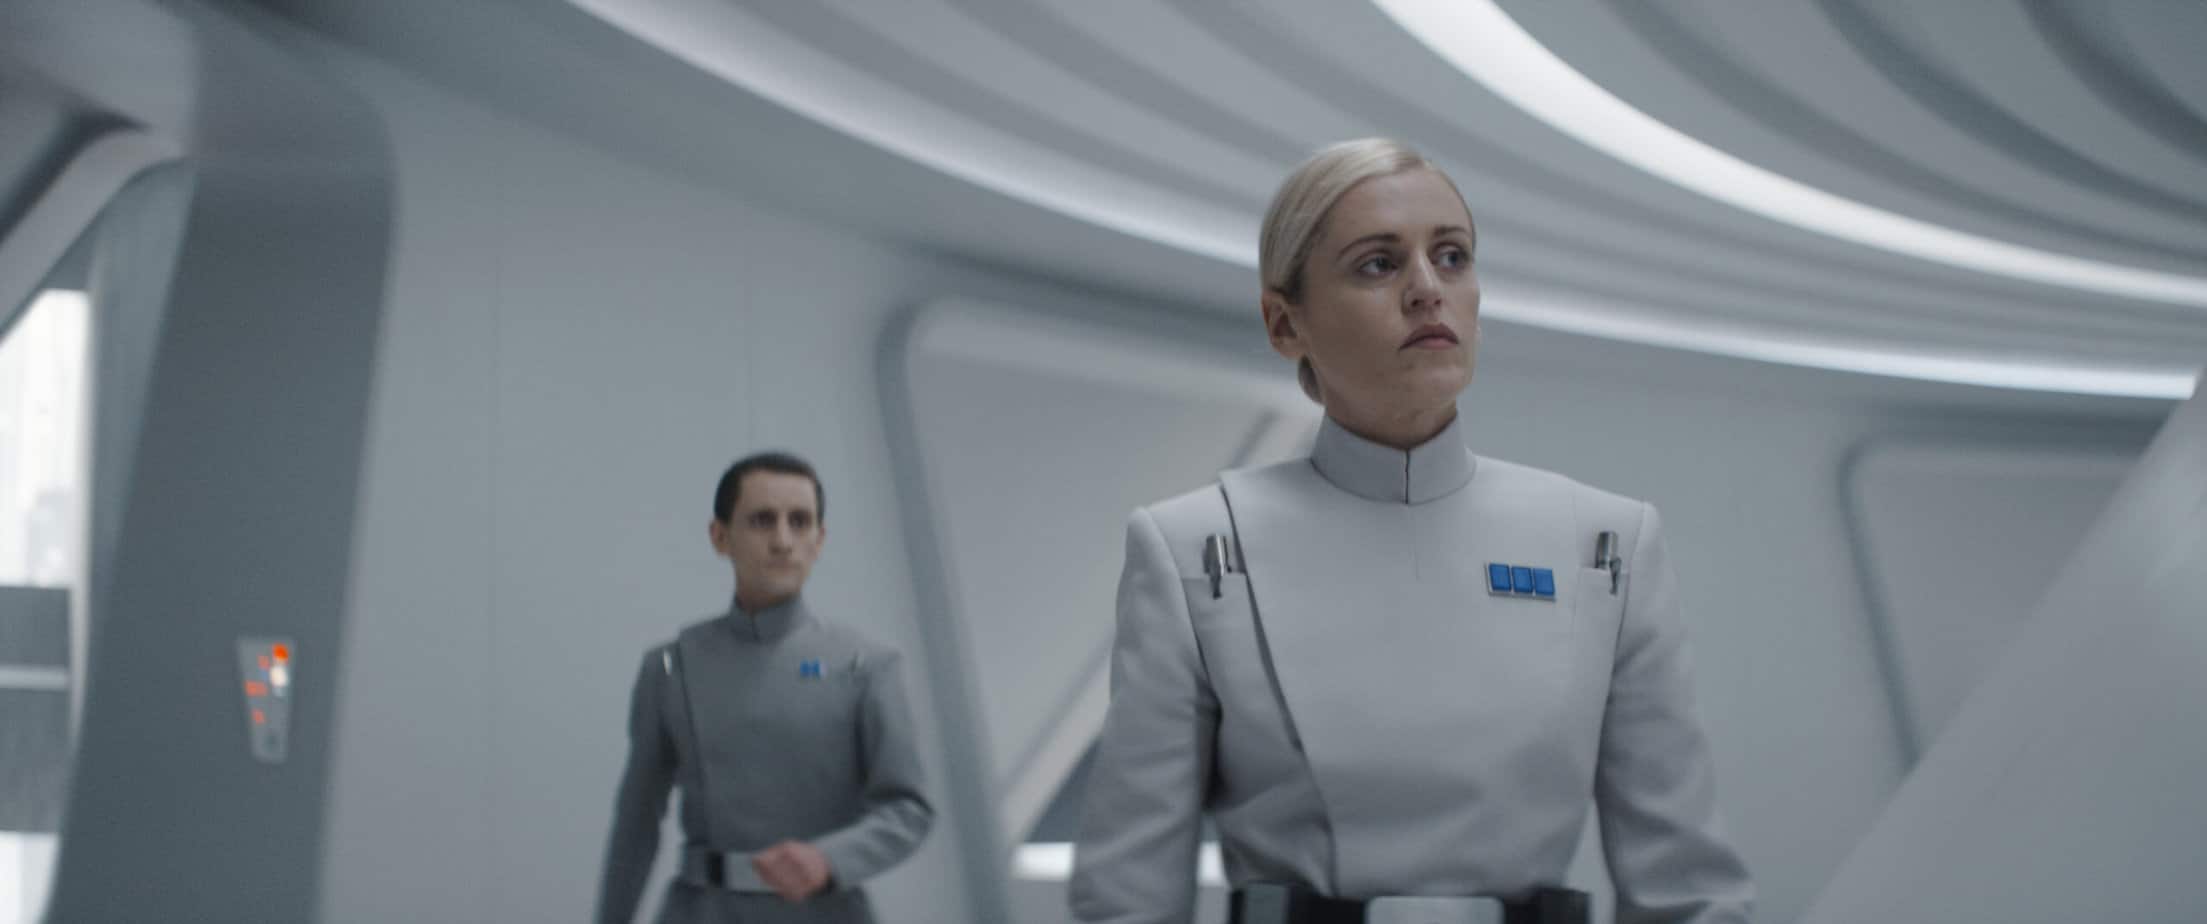 Is Andor kid friendly? parents guide to disney plus star wars show. woman in white uniform in a hallway with a man in a grey uniform behind her.